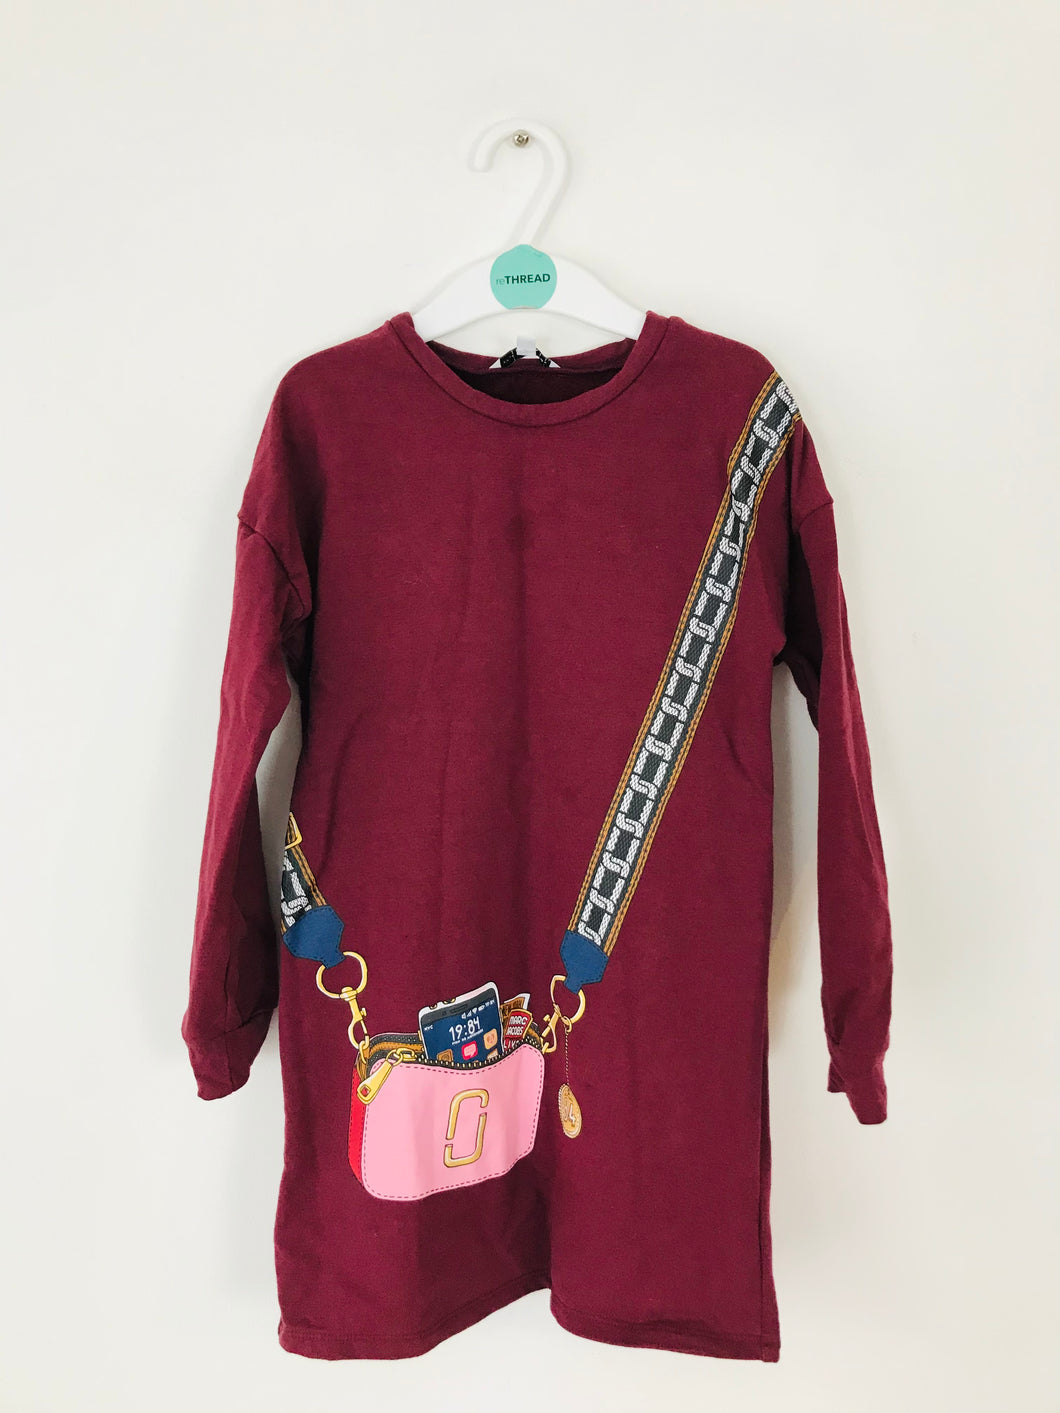 Little Marc Jacobs Girl’s Graphic Jumper Dress | 6 Years | Burgundy Red